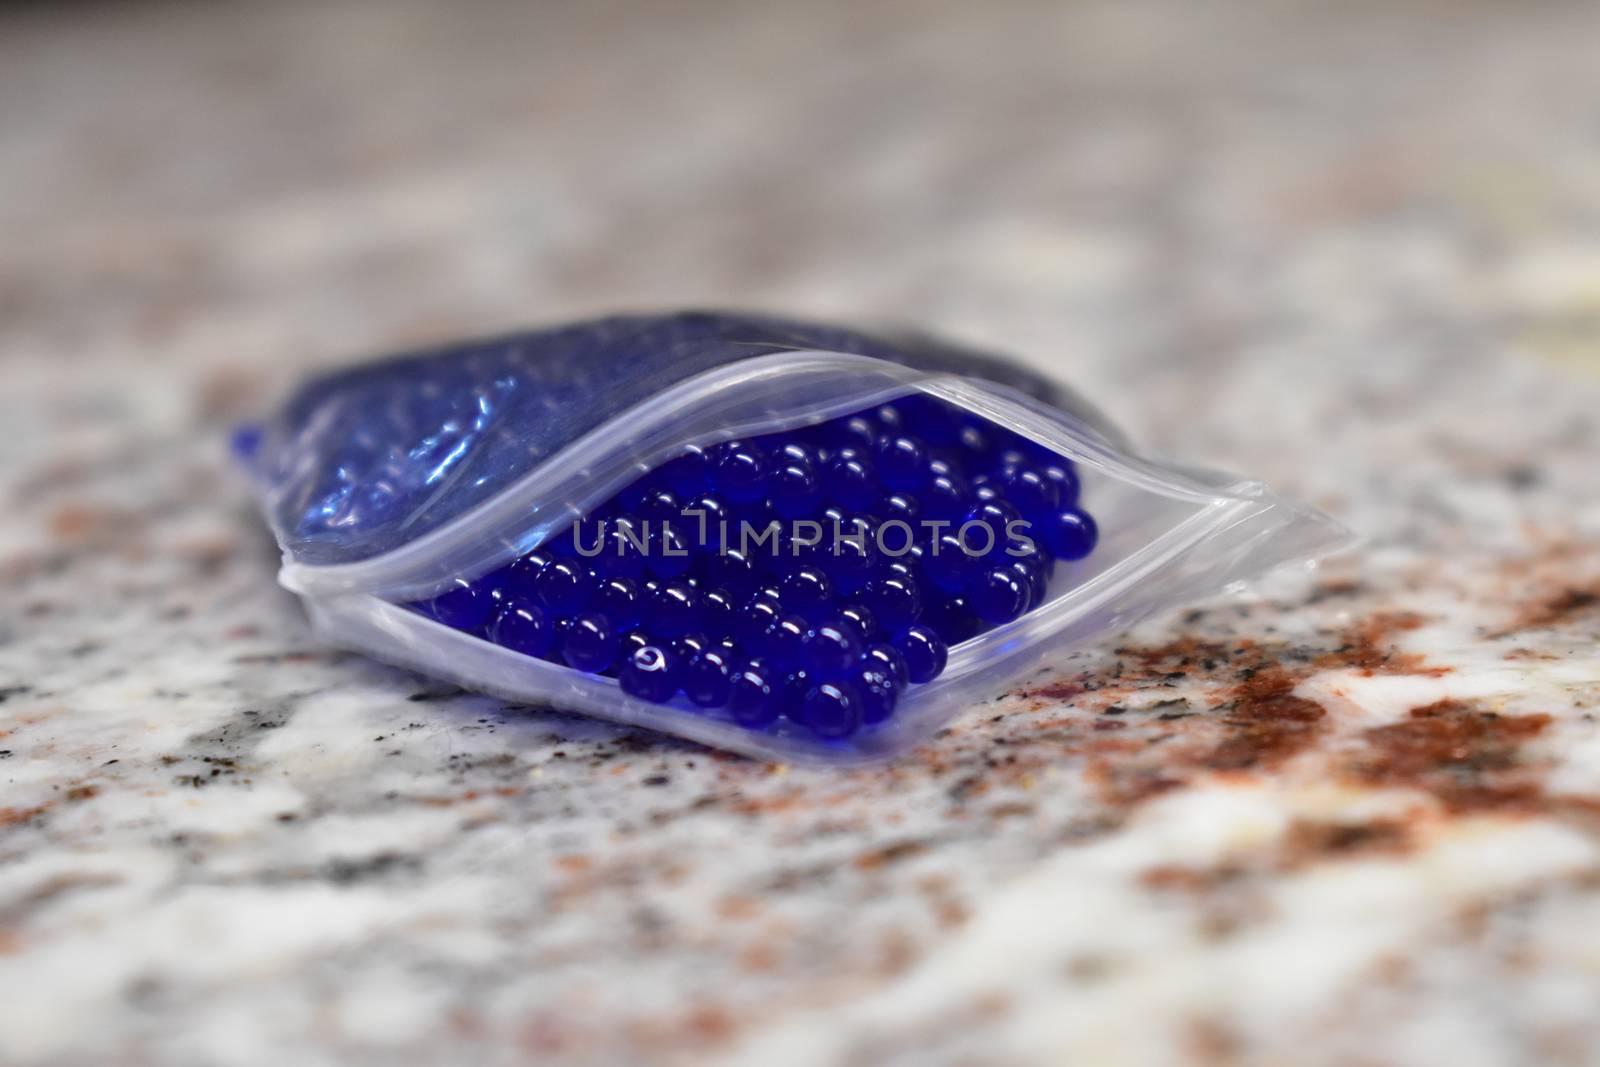 Tiny Blue Orbs in a Plastic Pouch by bju12290